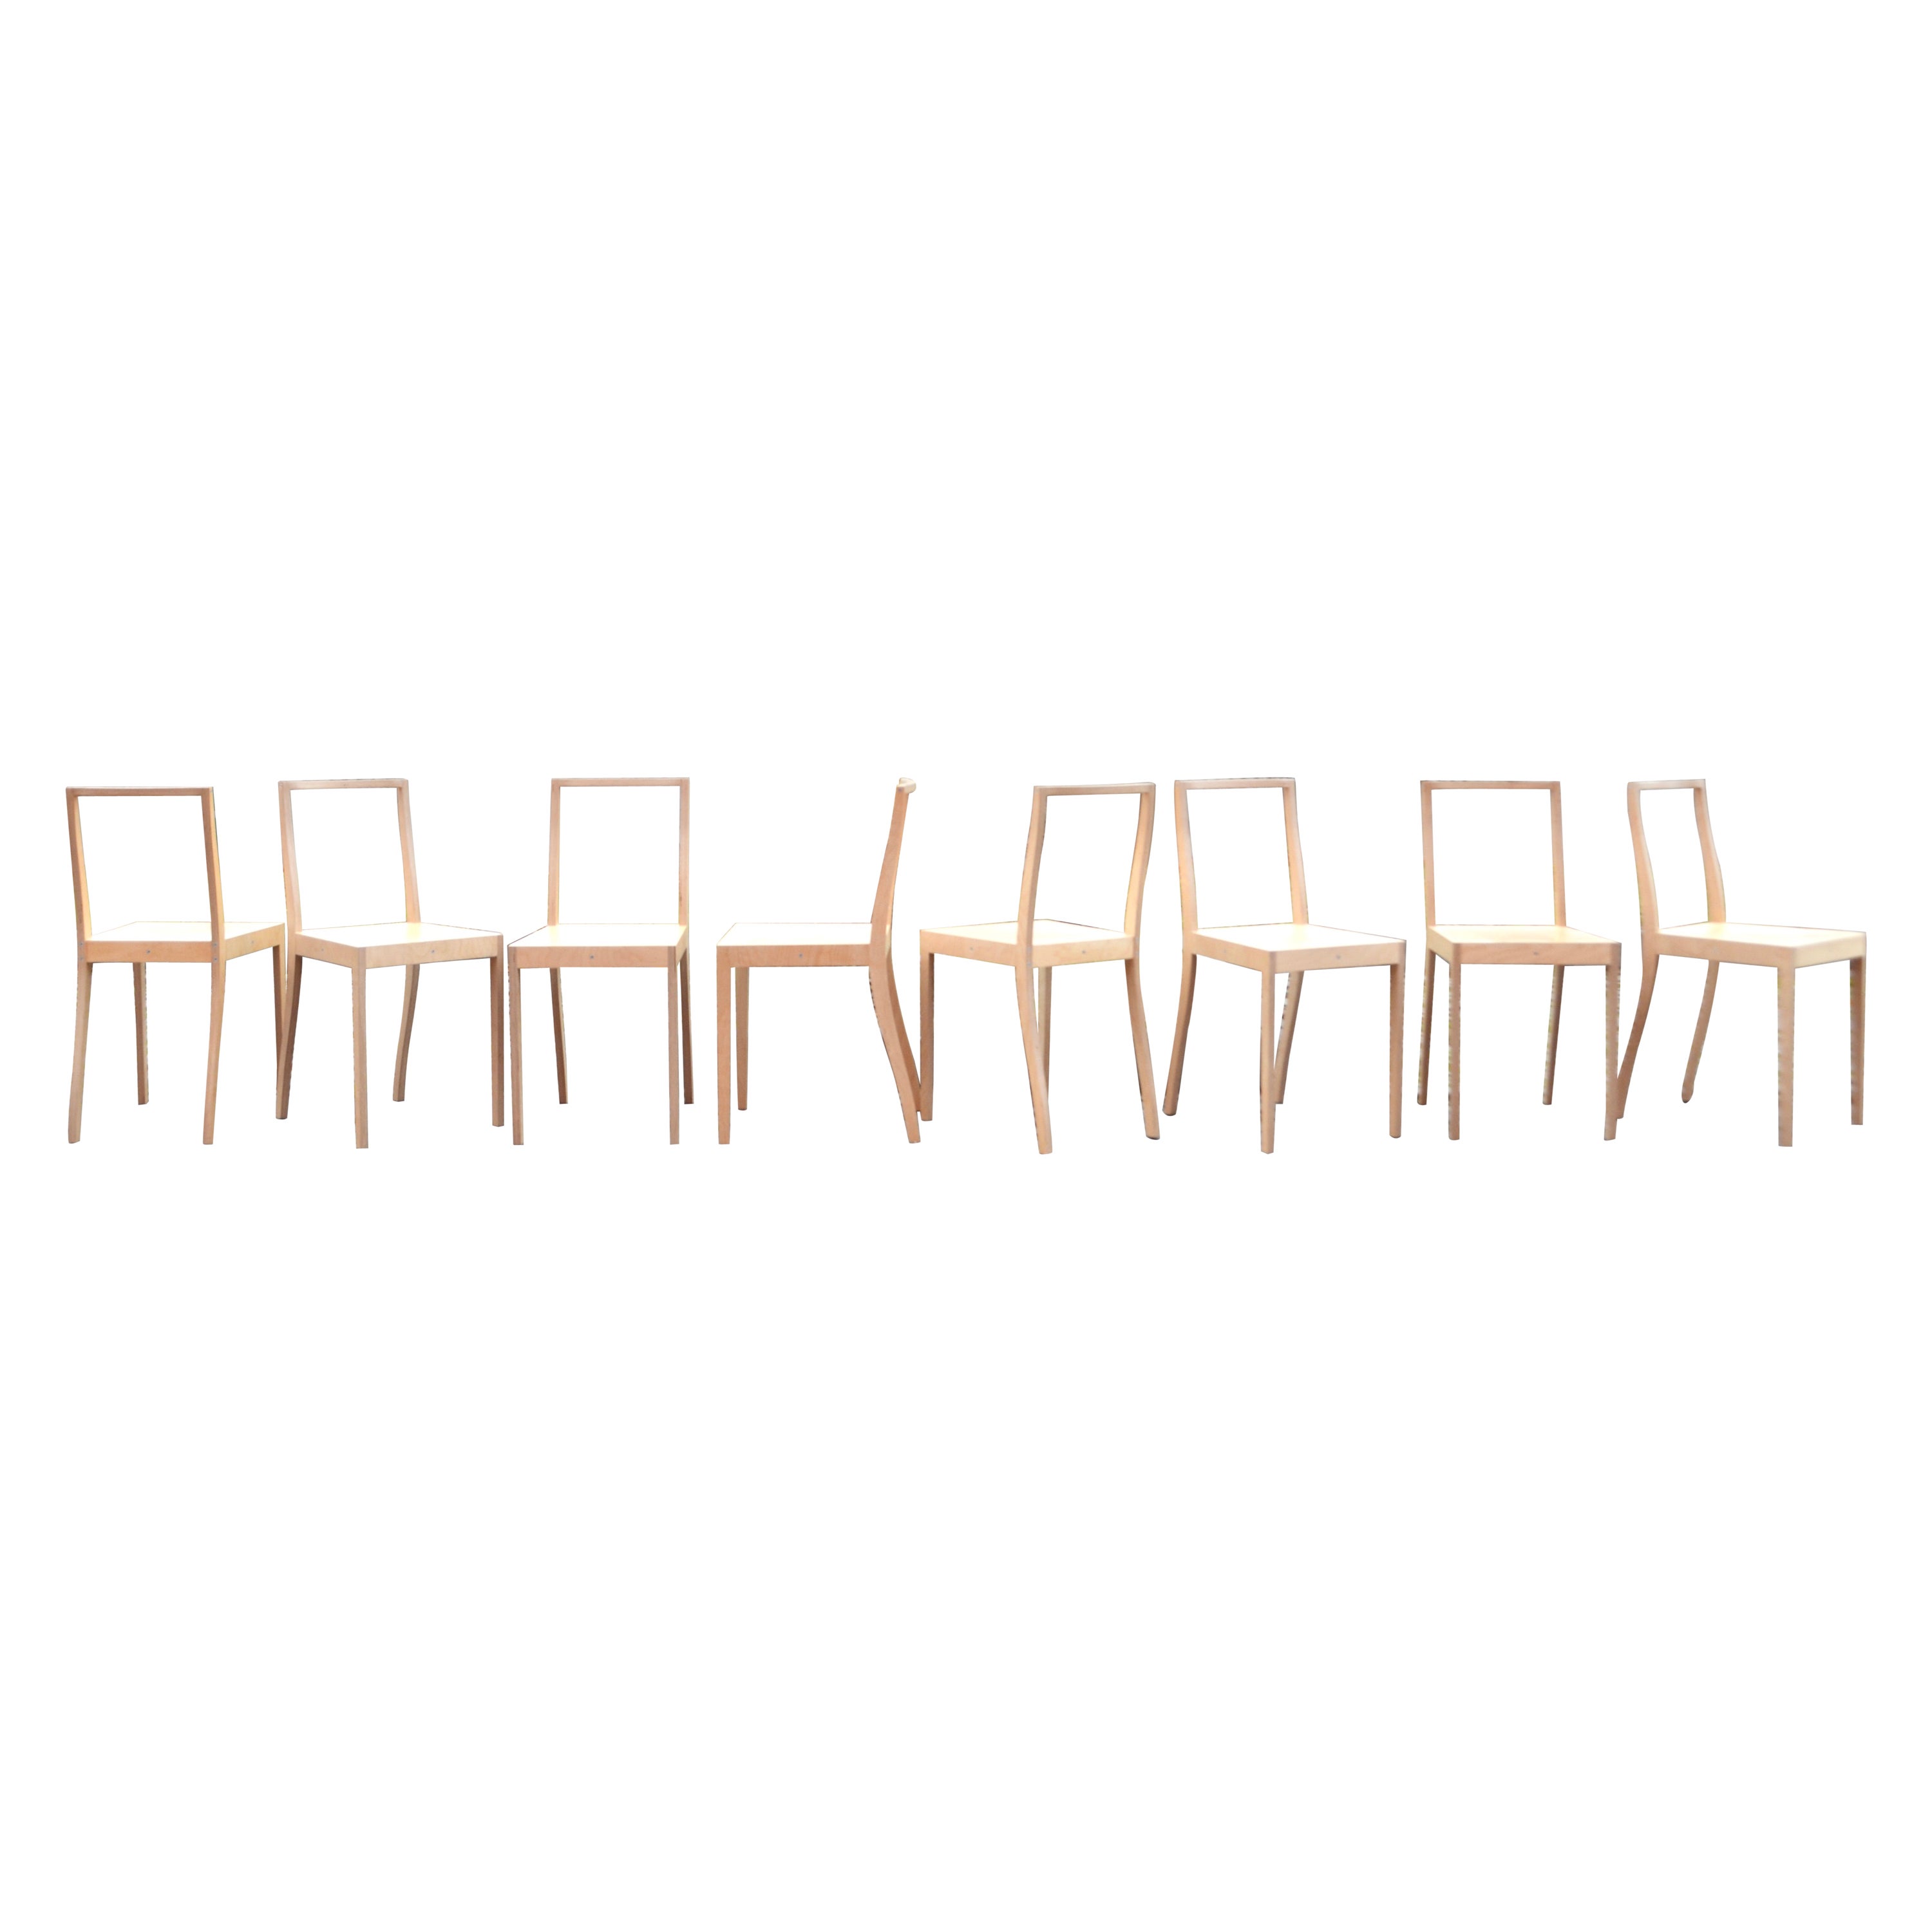 Jasper Morrison Ply Chair Plywood for Vitra Set of 8 For Sale